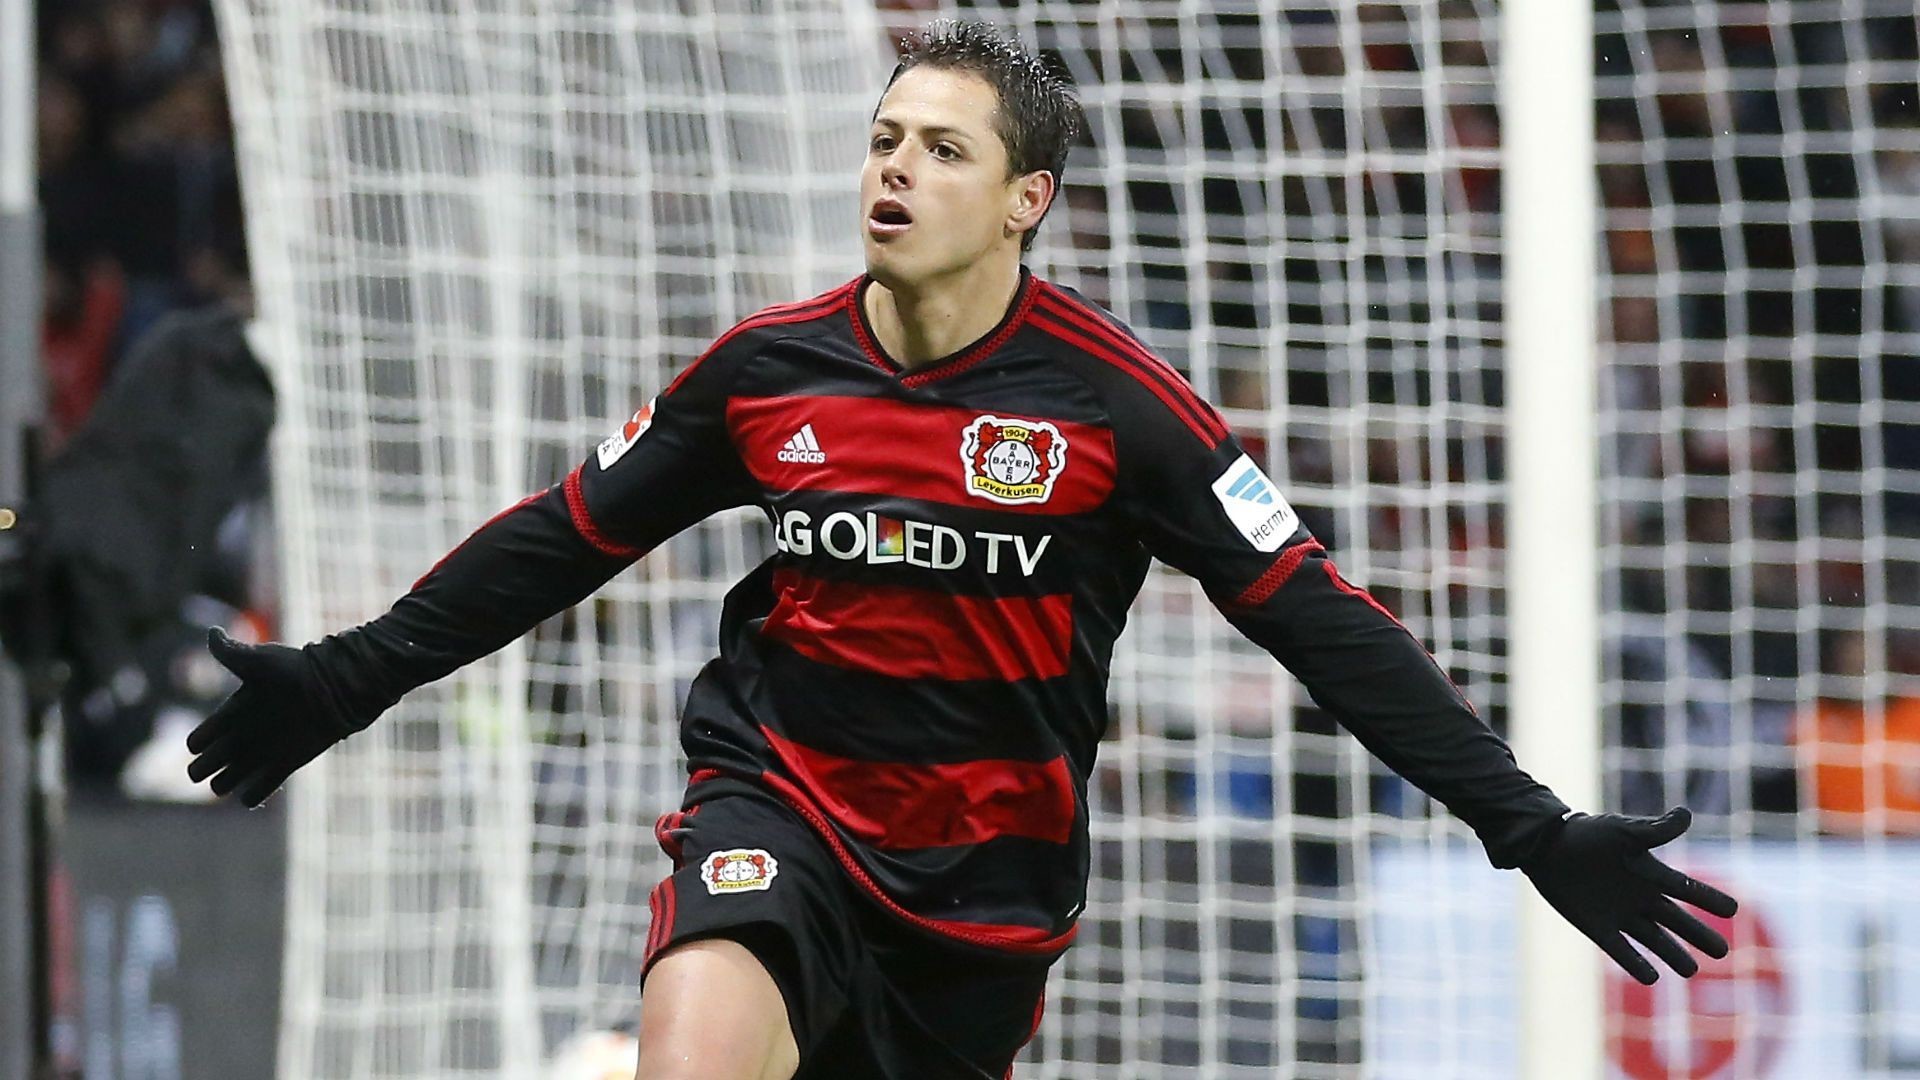 1920x1080 Last year, the stage was set after a superb season with Bayer Leverkusen  for Chicharito to shine in the Copa America Centenario.